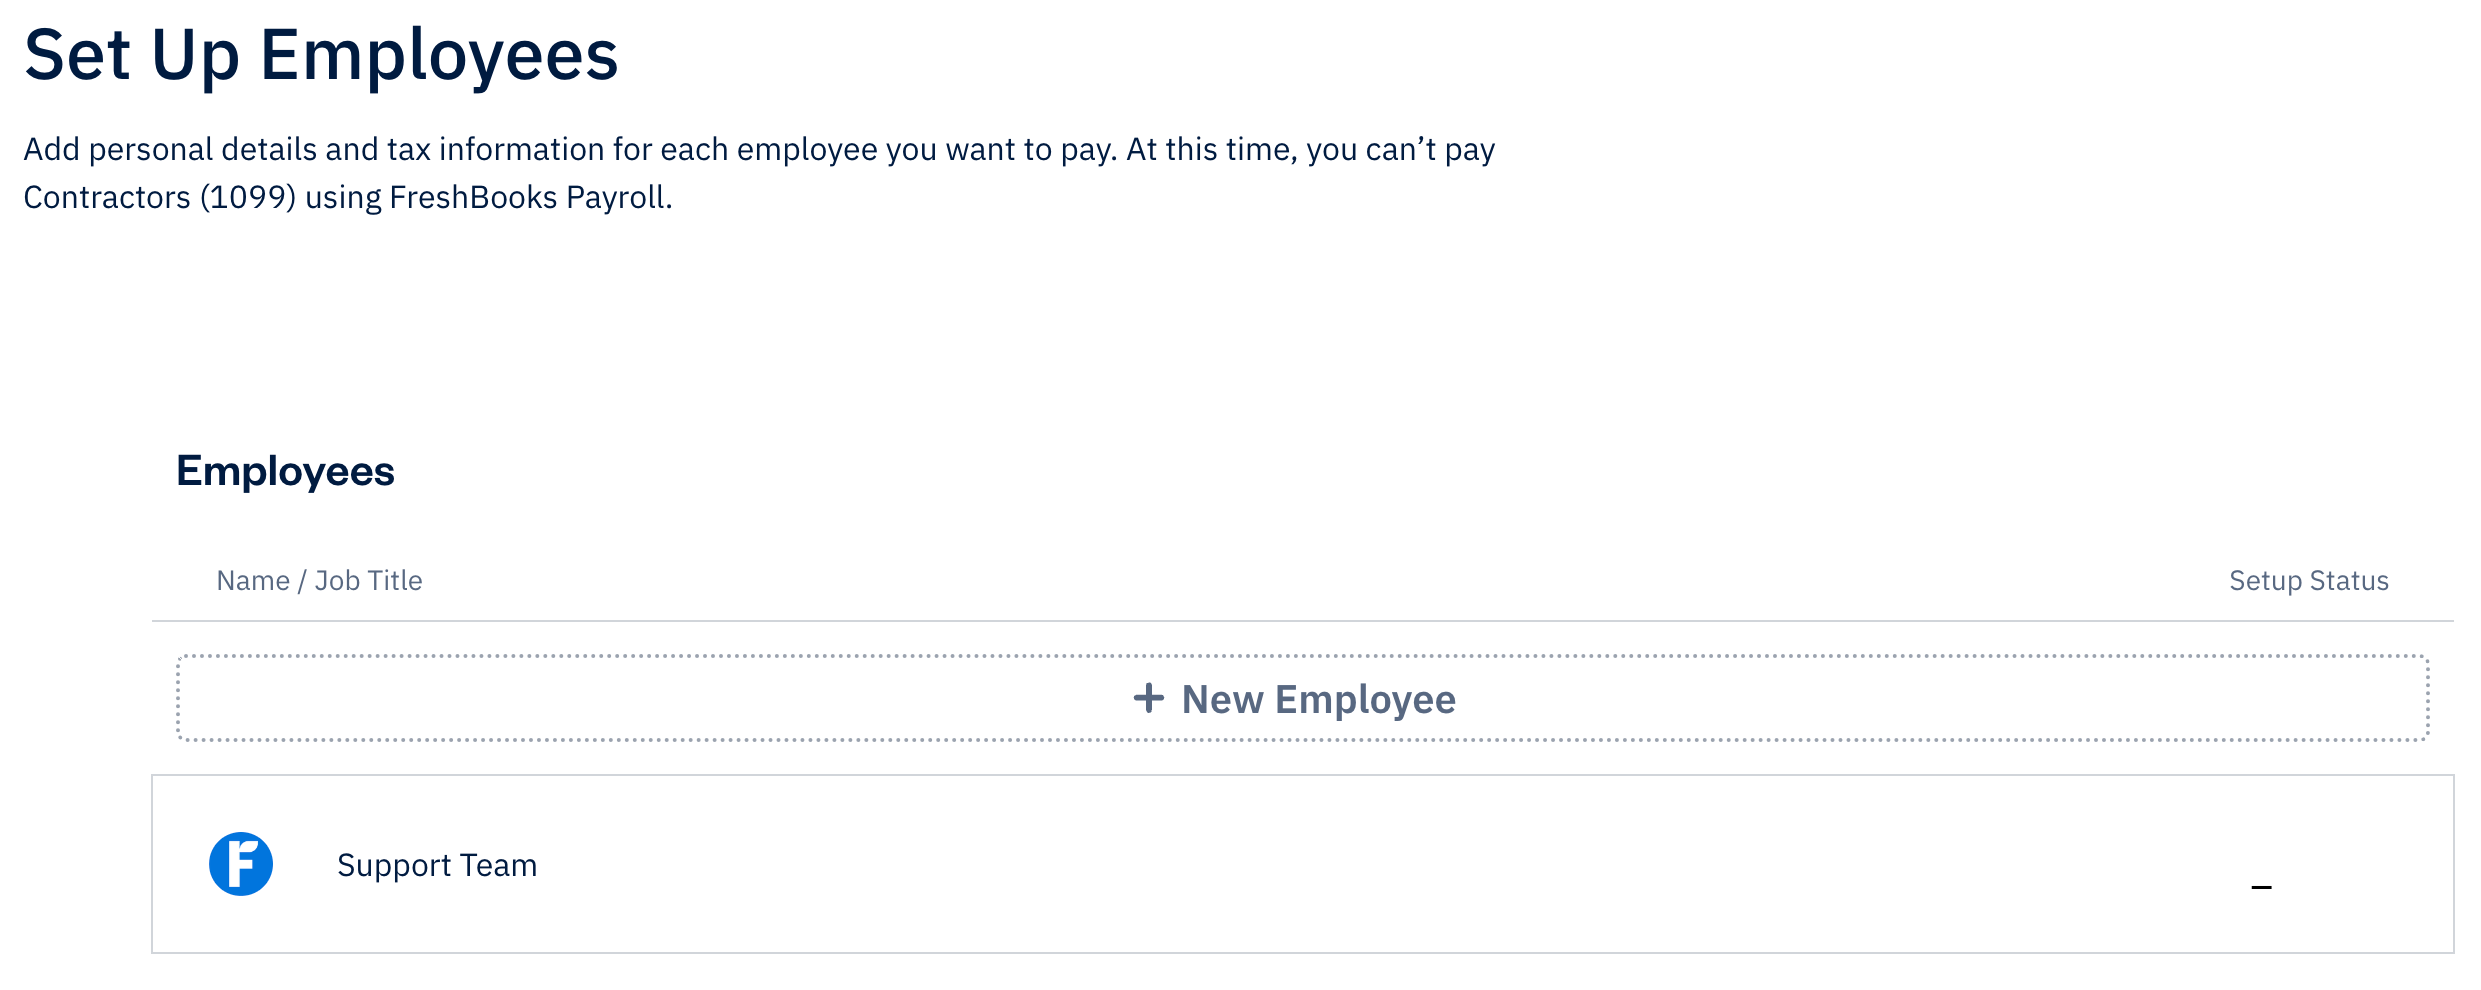 List of employees with option to create new employee or select an existing employee from the list below.